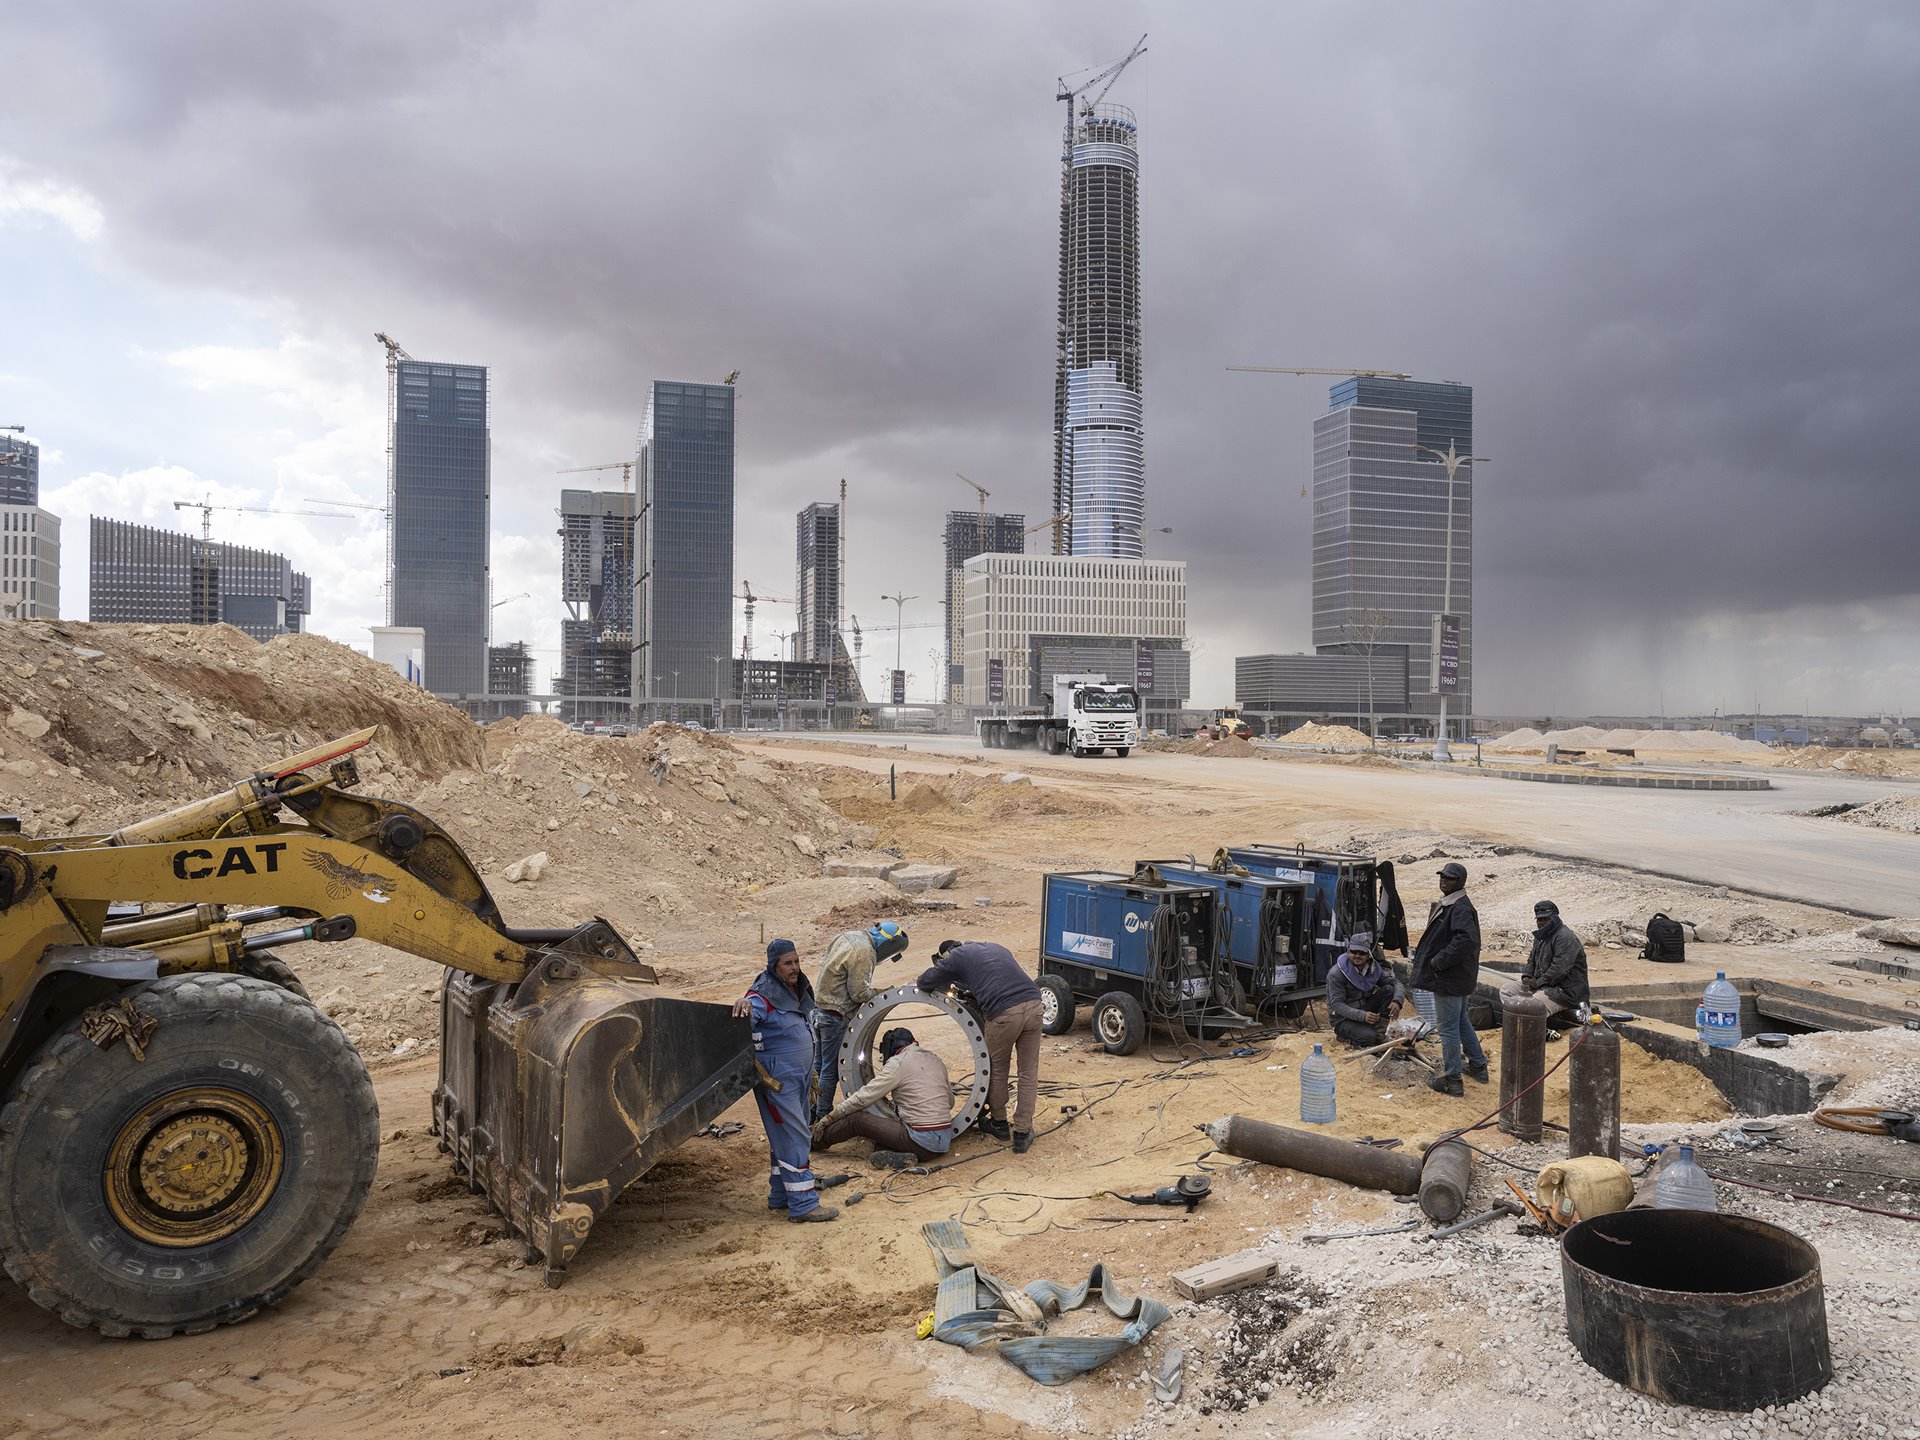 <p>Welders work near the future Central Business District of Egypt&#39;s New Administrative Capital, under construction near Cairo. The Iconic Tower (center) will be Africa&rsquo;s tallest building, at 394 meters high.</p>
